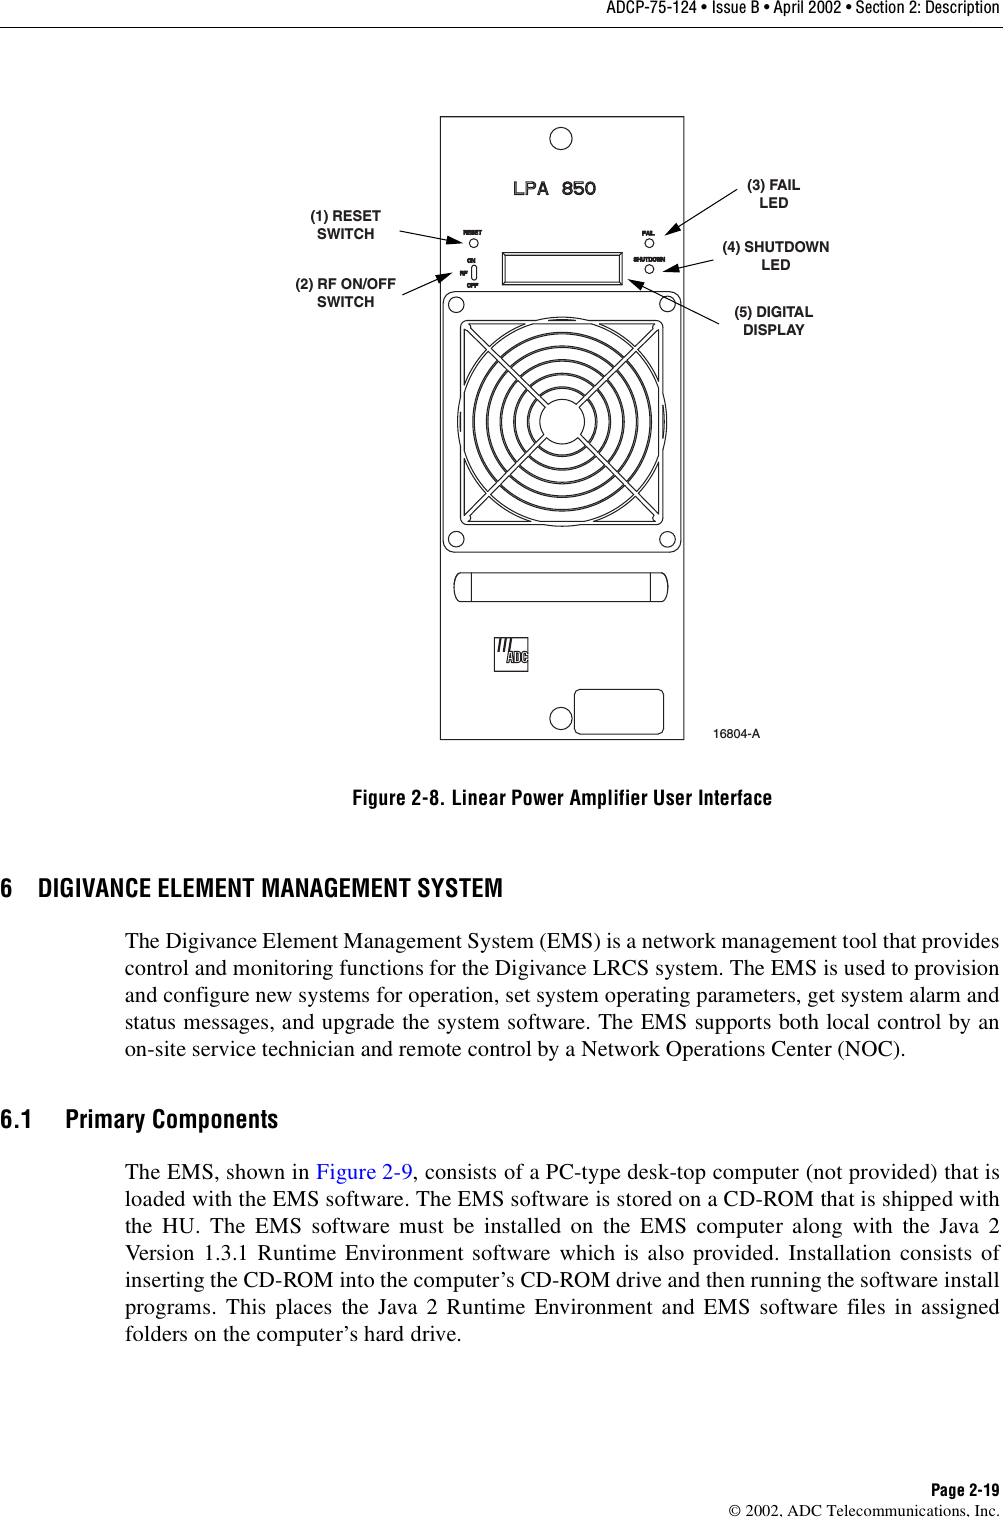 ADCP-75-124 • Issue B • April 2002 • Section 2: DescriptionPage 2-19©2002, ADC Telecommunications, Inc.Figure 2-8. Linear Power Amplifier User Interface6 DIGIVANCE ELEMENT MANAGEMENT SYSTEMThe Digivance Element Management System (EMS) is anetwork management tool that providescontrol and monitoring functions for the Digivance LRCS system. The EMS is used to provisionand configure new systems for operation, set system operating parameters, get system alarm andstatus messages, and upgrade the system software. The EMS supports both local control by anon-site service technician and remote control by aNetwork Operations Center (NOC).6.1 Primary ComponentsThe EMS, shown in Figure 2-9,consists of aPC-type desk-top computer (not provided) that isloaded with the EMS software. The EMS software is stored on aCD-ROM that is shipped withthe HU. The EMS software must be installed on the EMS computer along with the Java 2Version 1.3.1 Runtime Environment software which is also provided. Installation consists ofinserting the CD-ROM into the computer’s CD-ROM drive and then running the software installprograms. This places the Java 2Runtime Environment and EMS software files in assignedfolders on the computer’s hard drive.(1) RESETSWITCH(2) RF ON/OFFSWITCH(3) FAILLED(4) SHUTDOWNLED(5) DIGITALDISPLAY16804-A